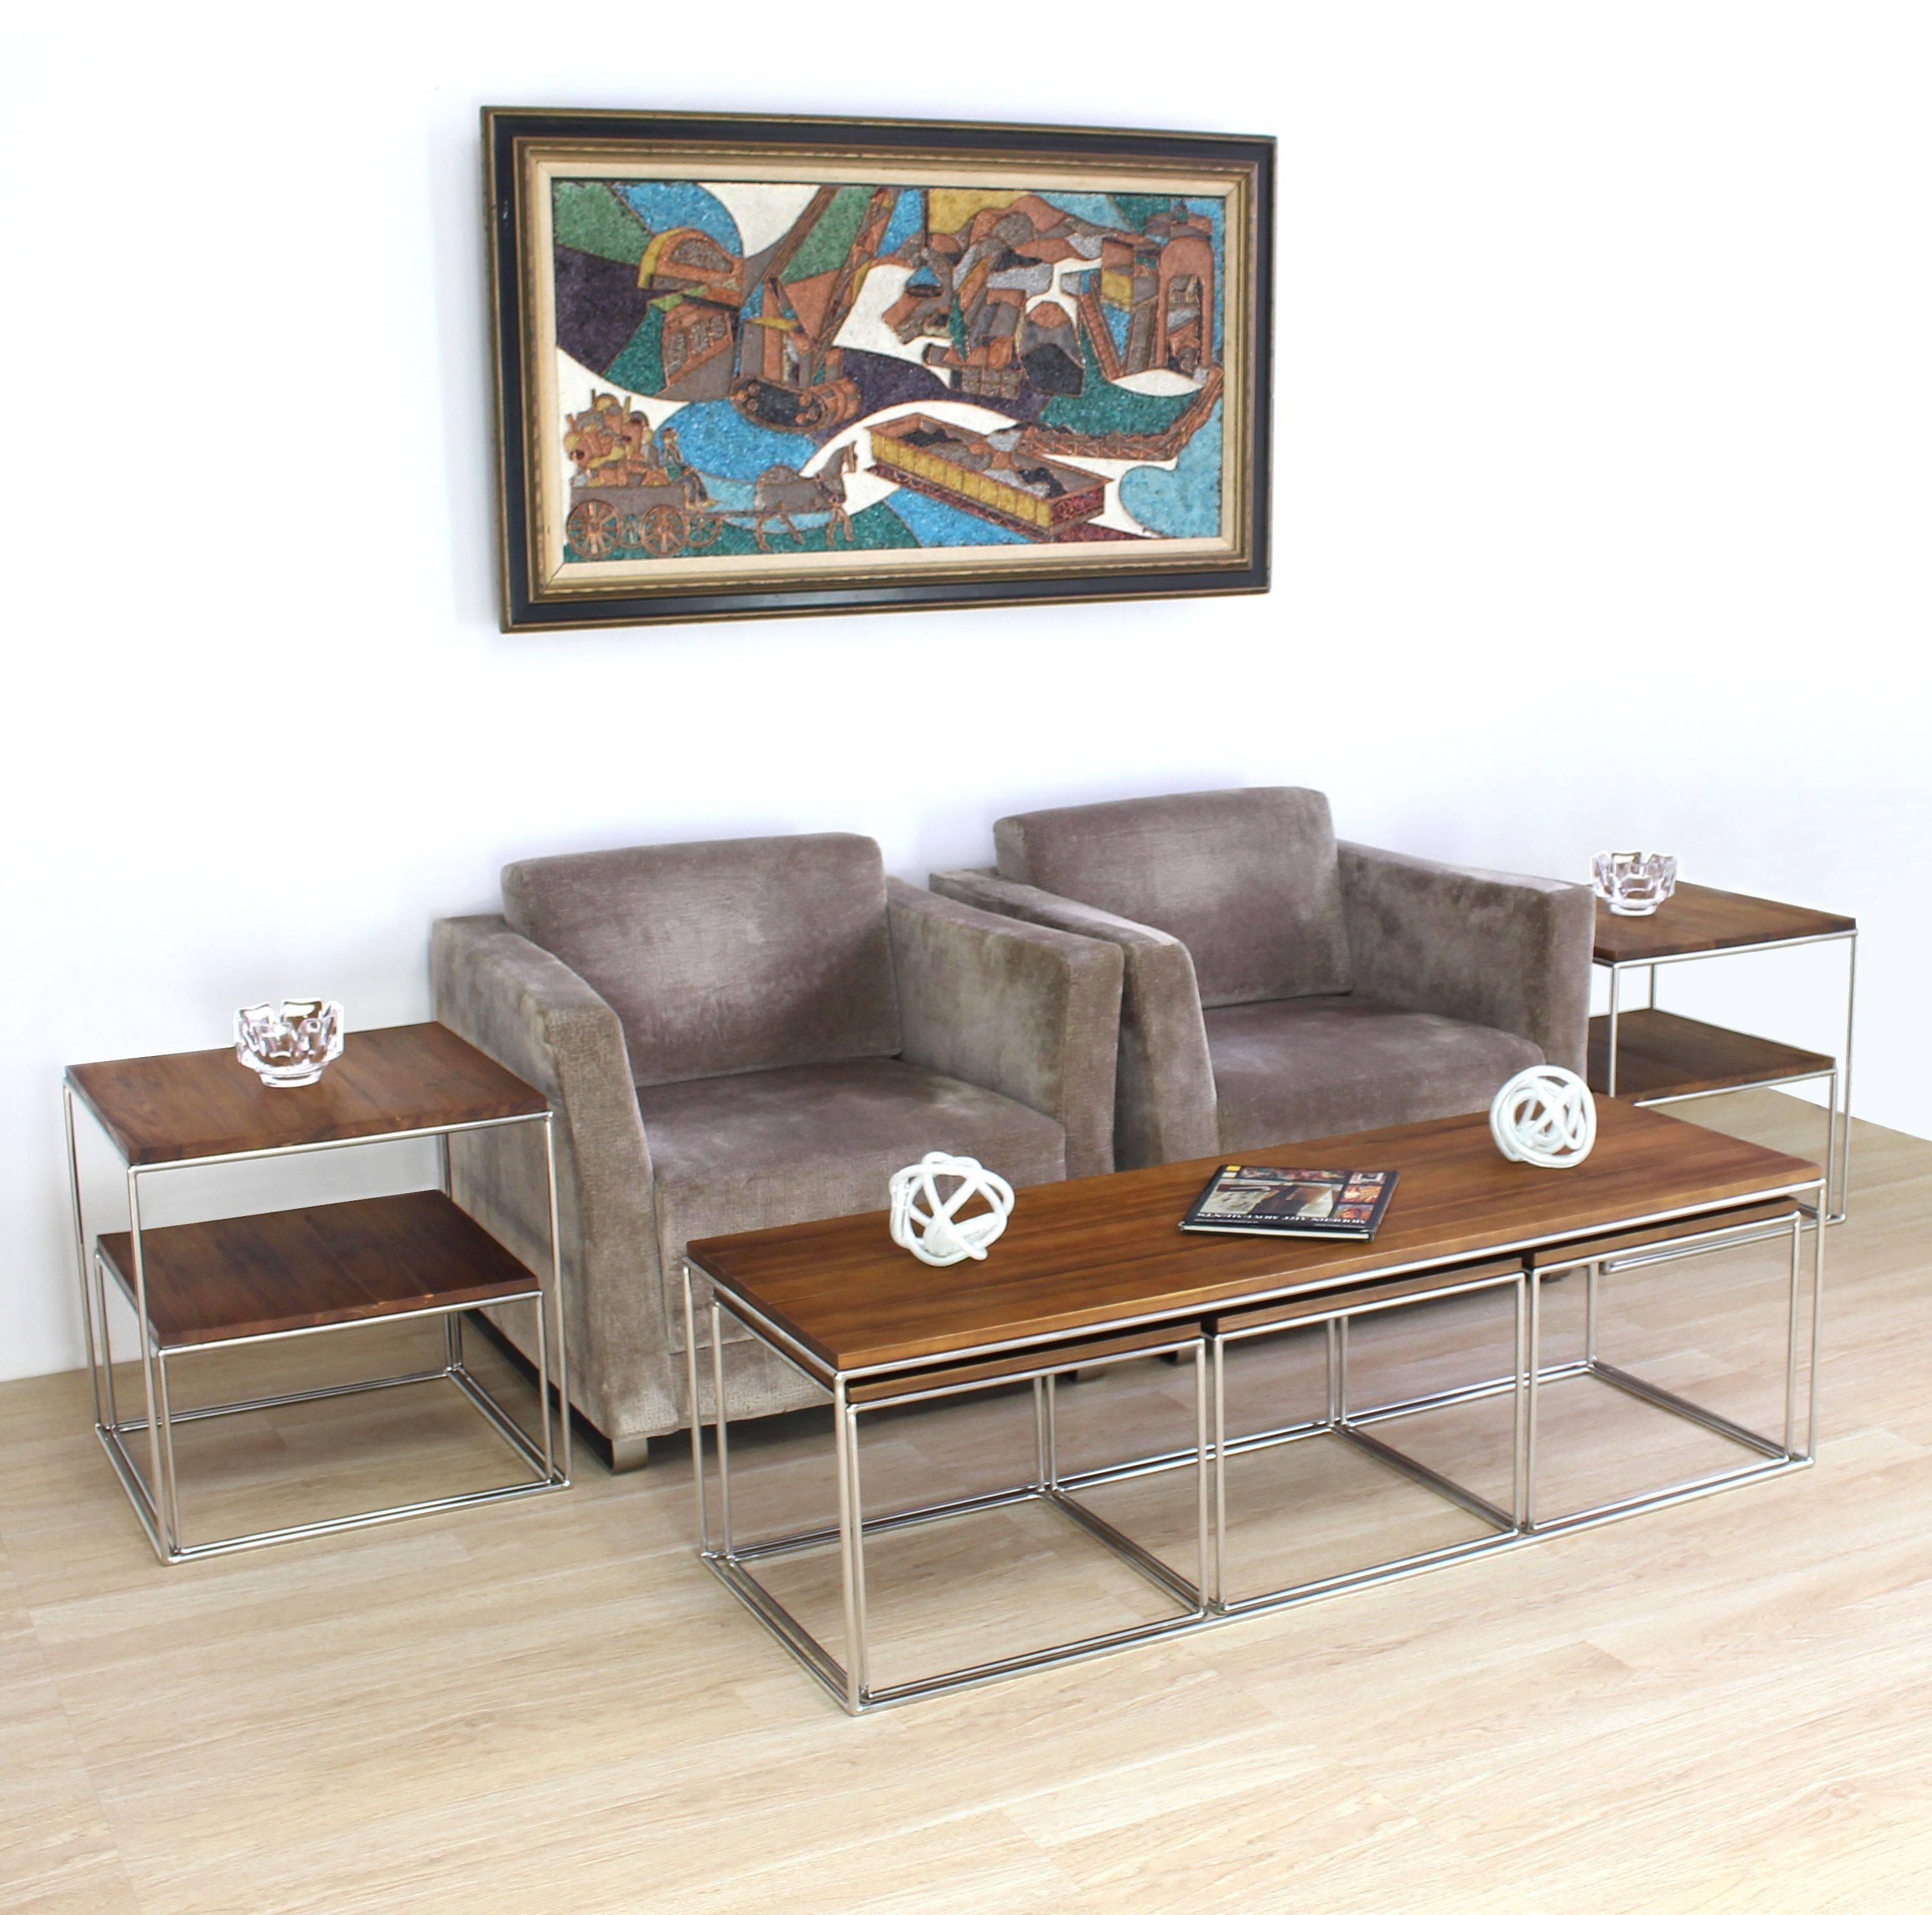 Established Lines, mid century modern decor, solid stainless steel base coffee table with three 18x18x15 nesting tables.
The elegant design four pieces table features countless functions and configurations going well beyond of a regular coffee